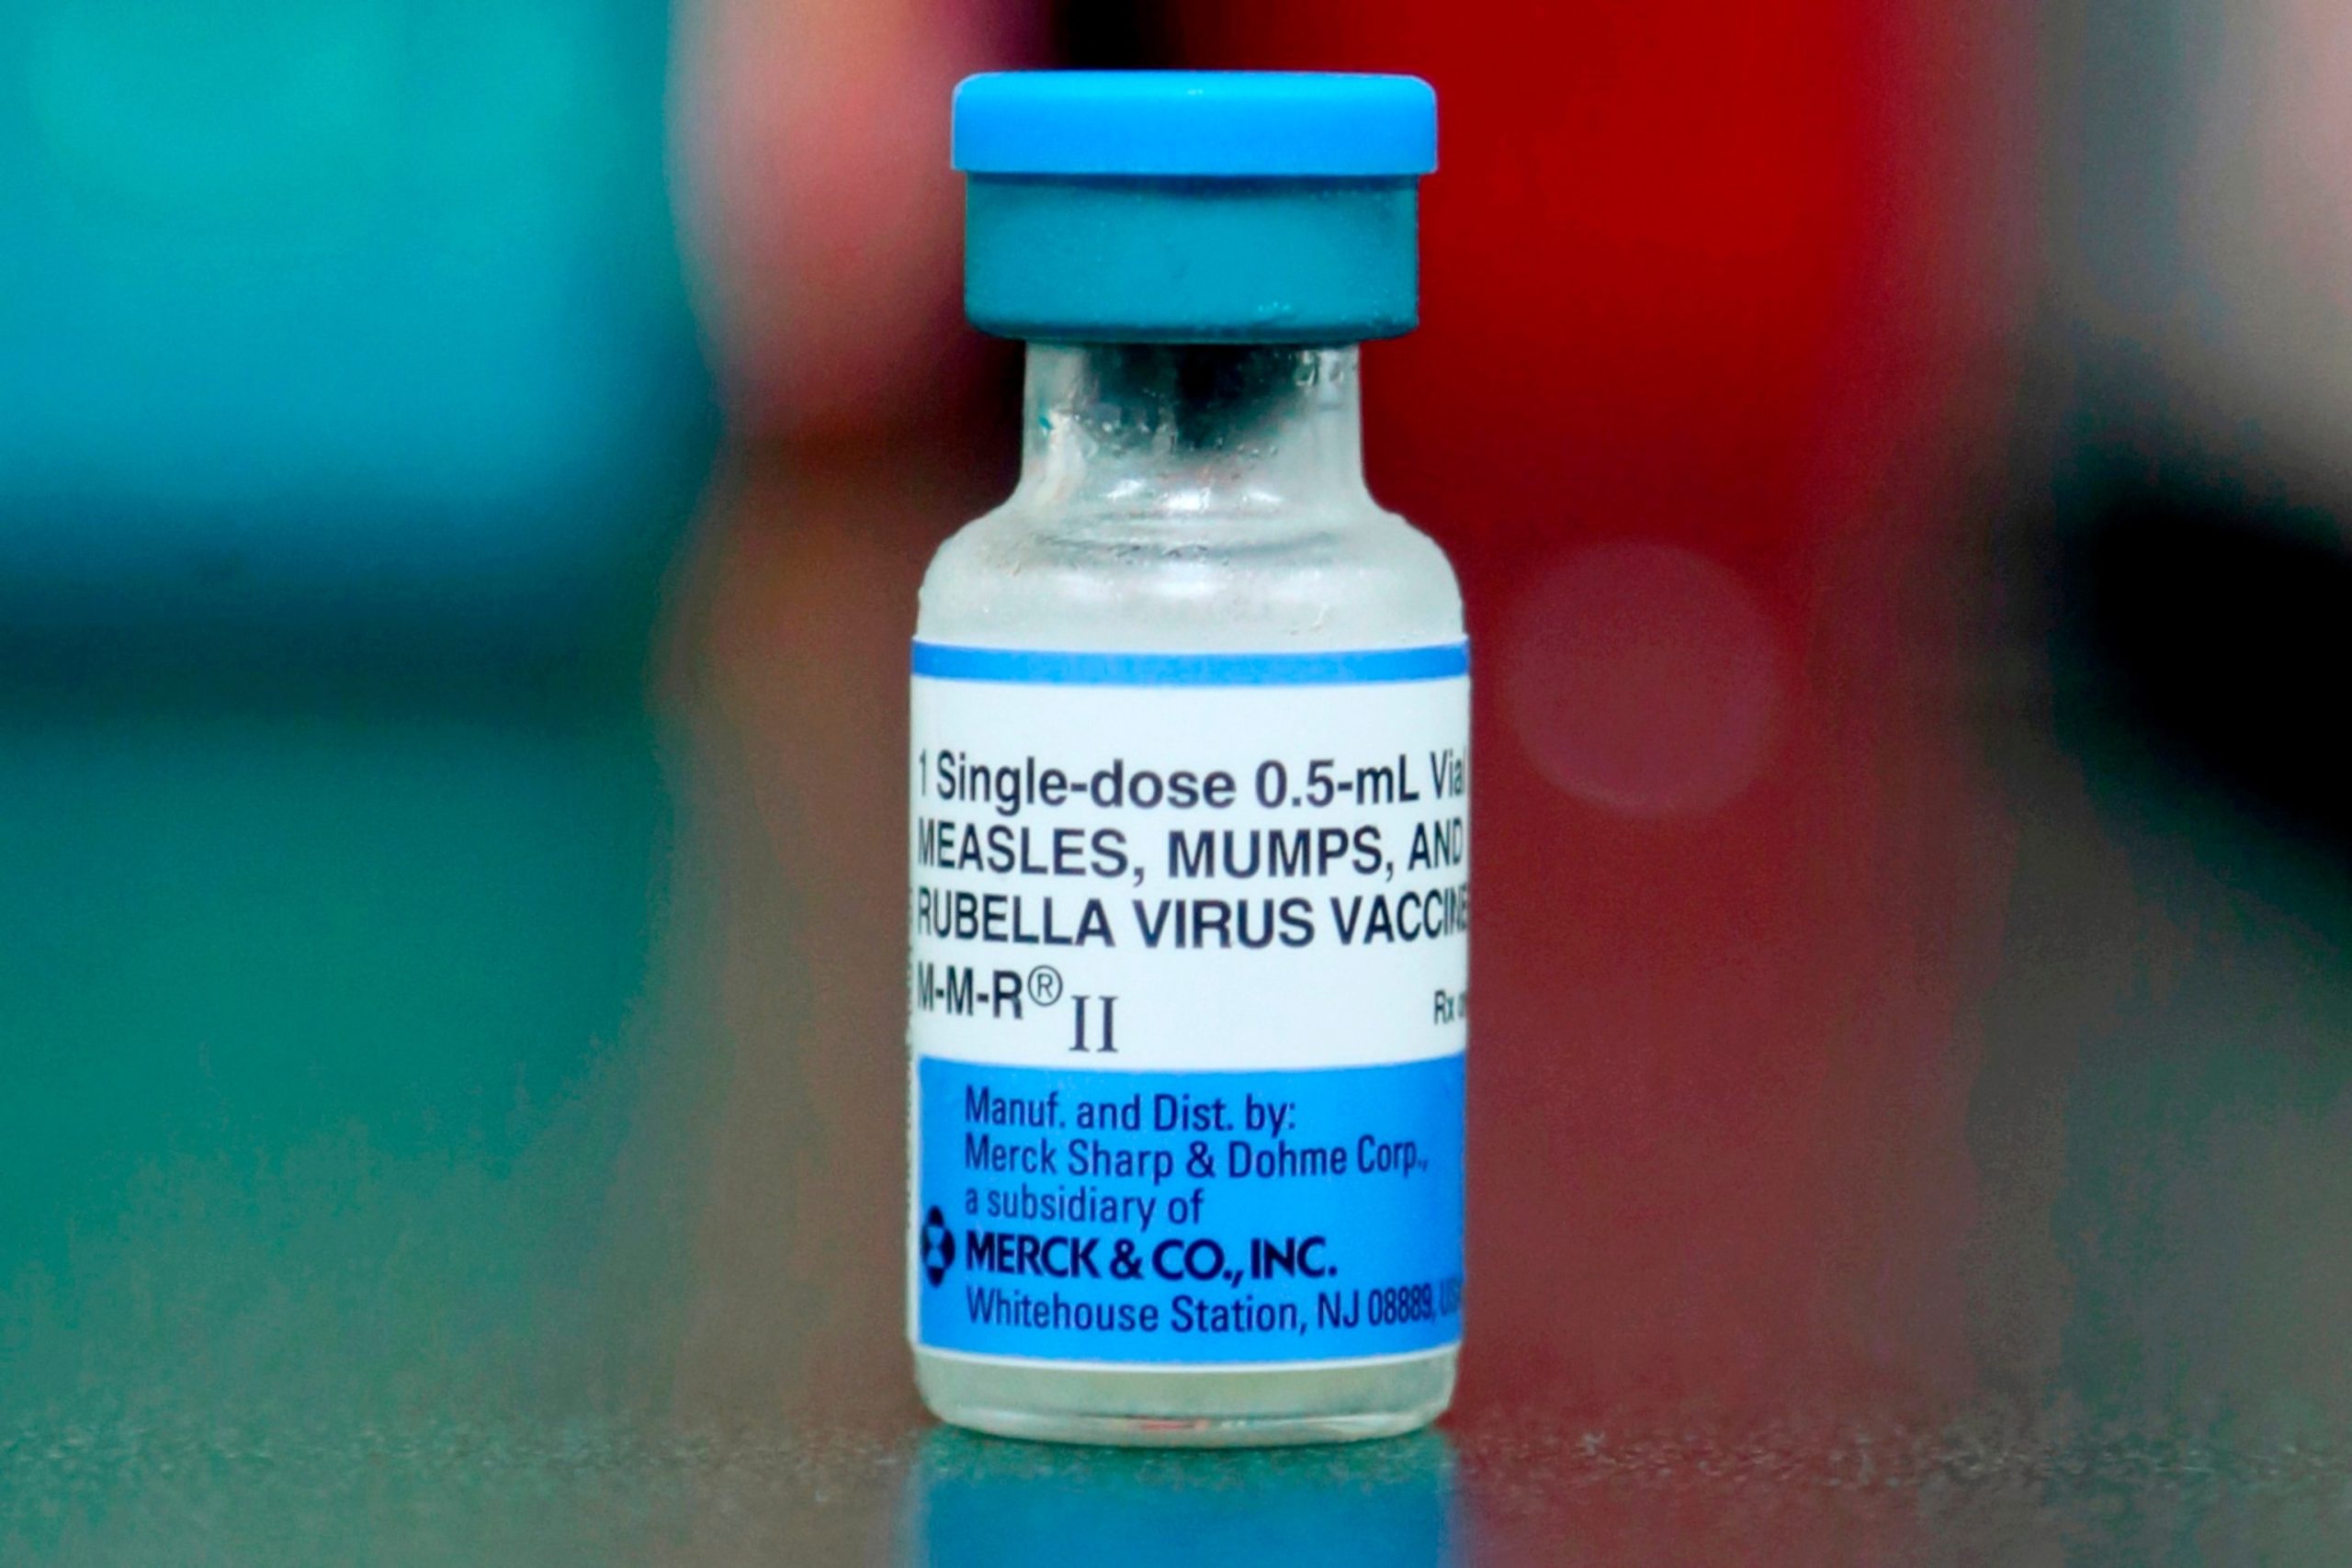 Free Measles Vaccines Offered by Doctors' Group in Philadelphia to Combat Outbreak